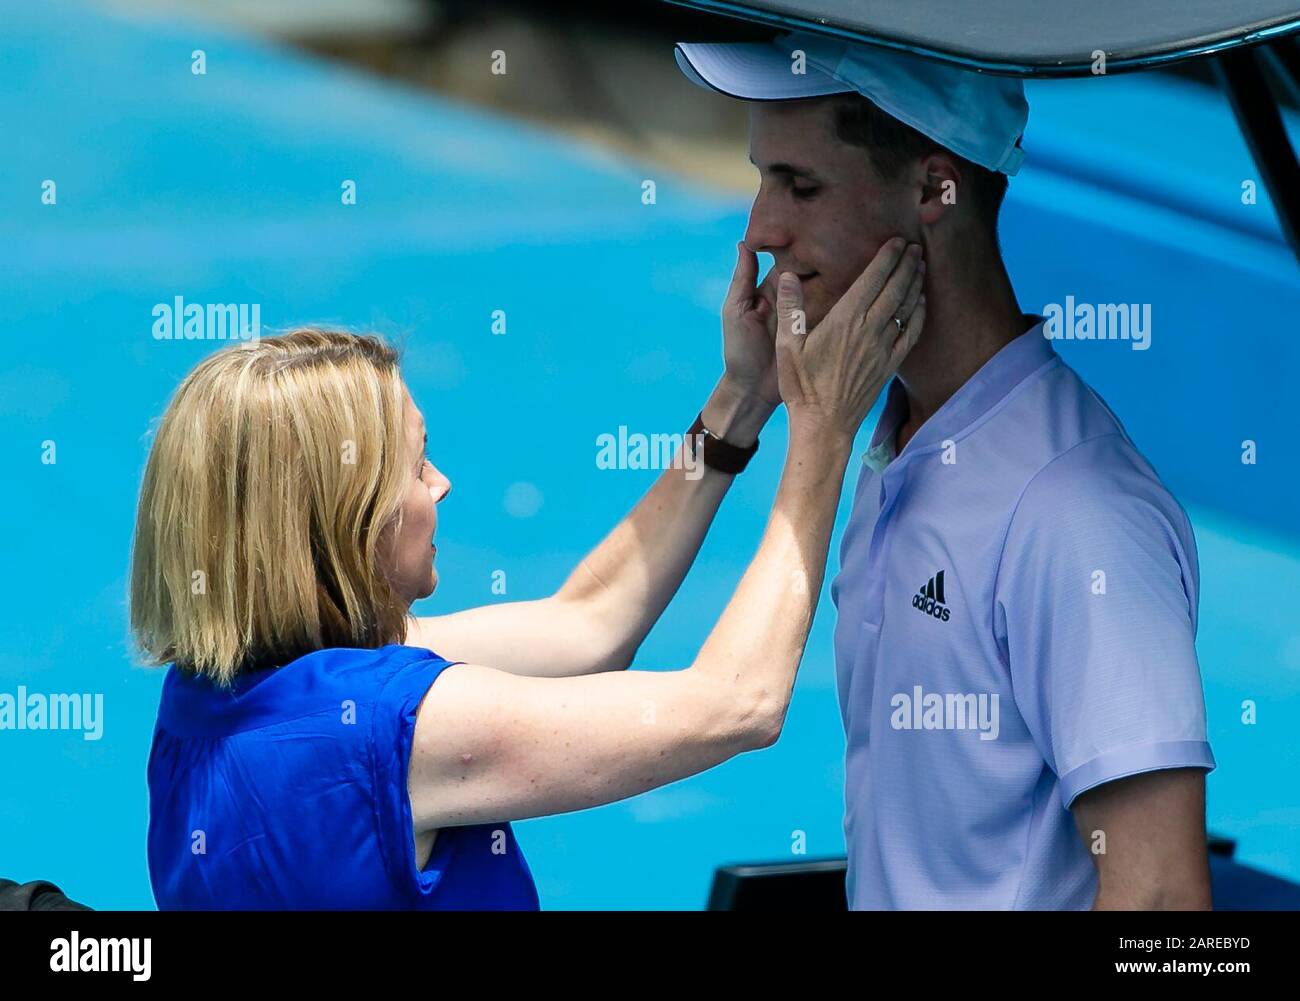 Melbourne, Australia. 28th Jan, 2020. Joe Salisbury from Great Britain gets medical attention at the 2020 Australian Open Grand Slam tennis tournament in Melbourne, Australia. Credit: Frank Molter/Alamy Live News Stock Photo